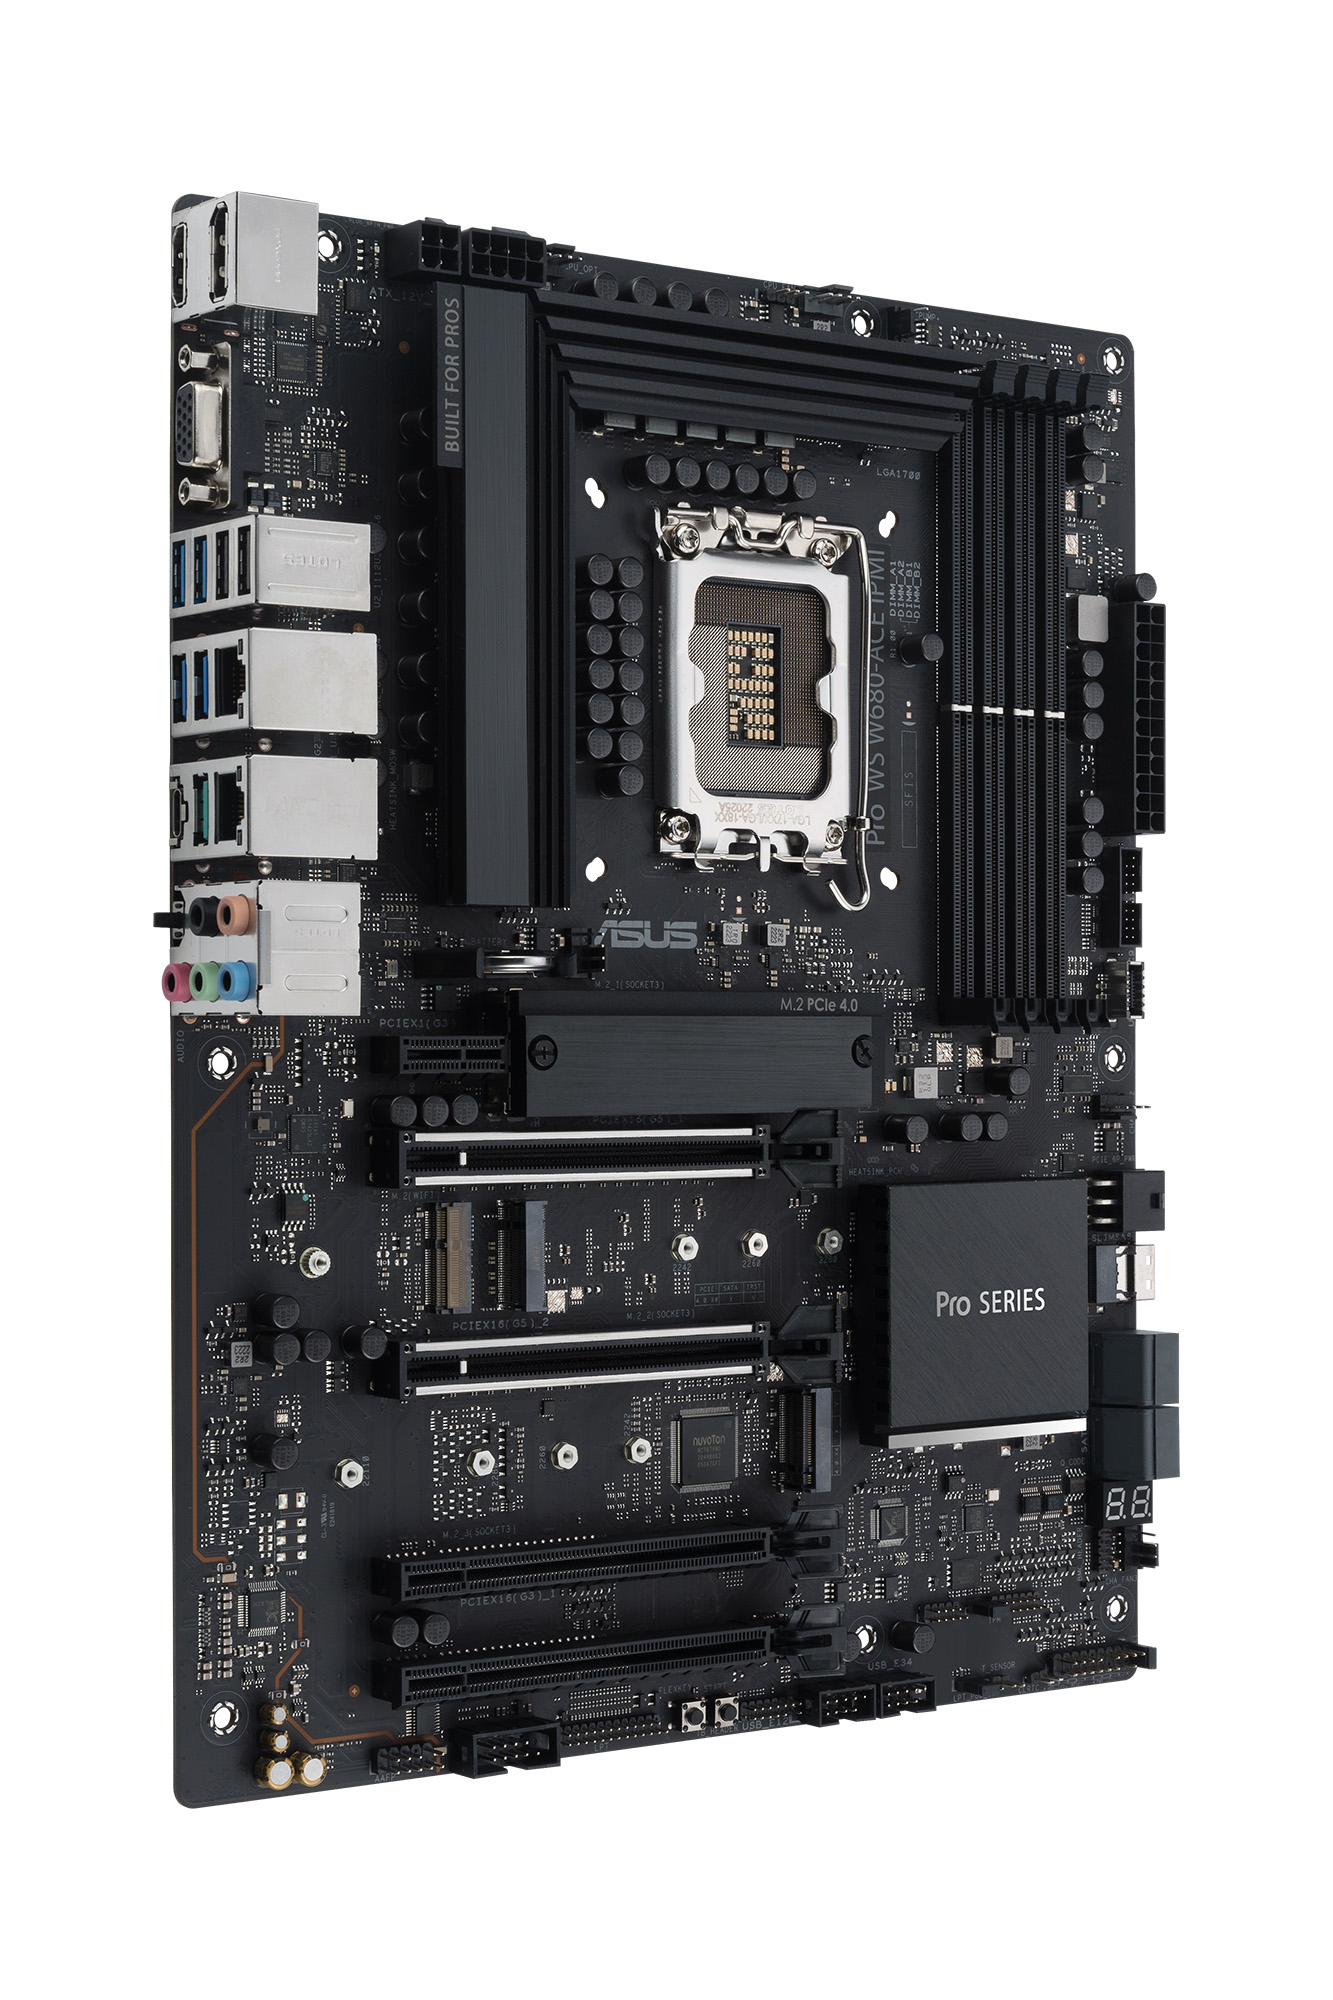 MB ASUS So1700 Pro WS W680-ACE IPMI ( Workstation)